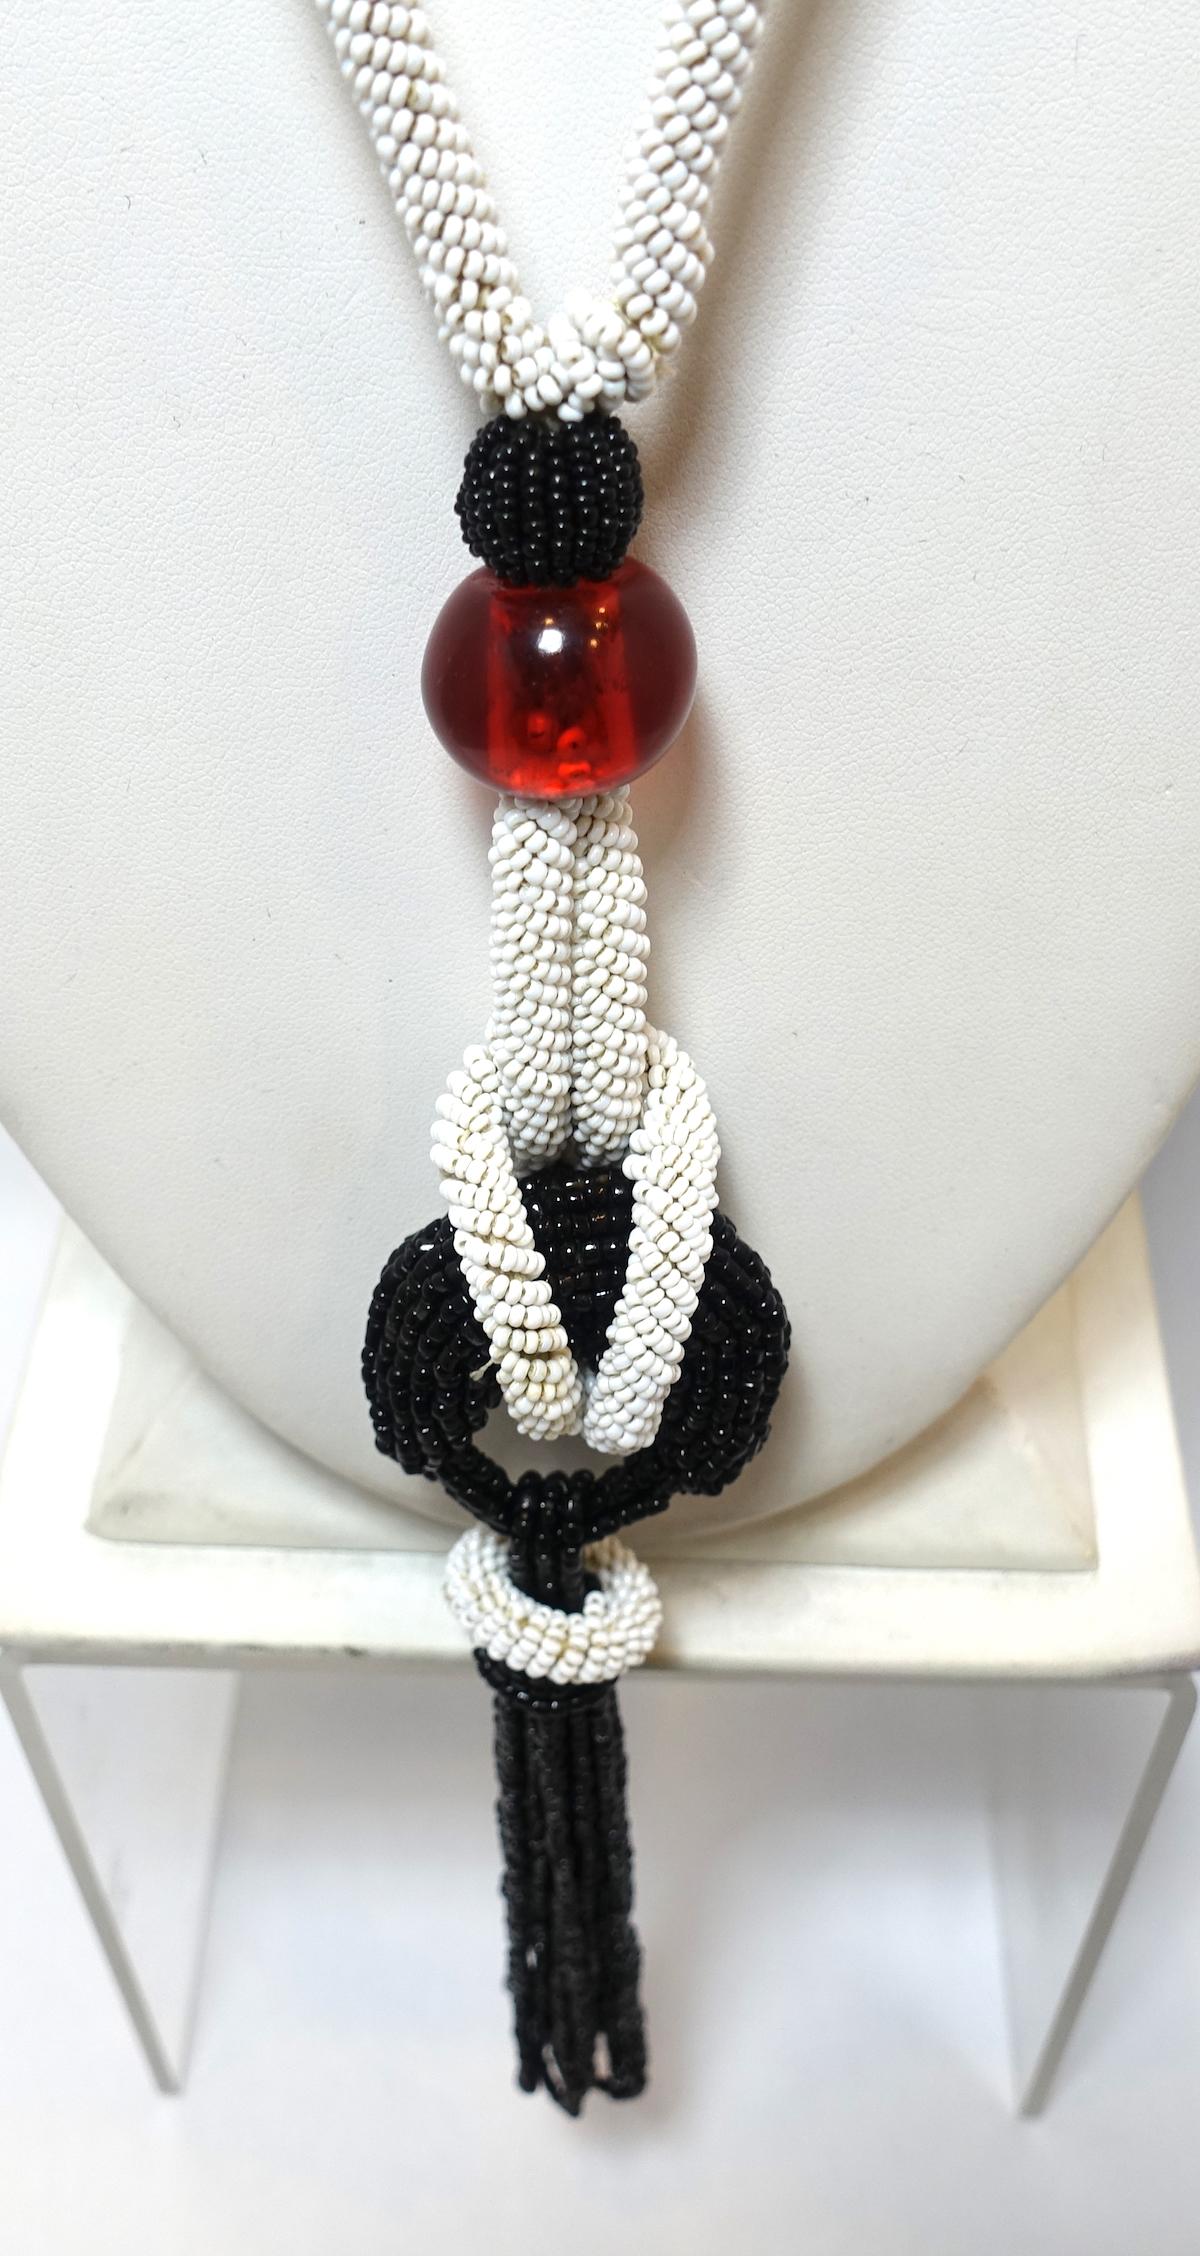 This vintage Art Deco 1920s flapper necklace features black and white beads with large cranberry red bead accents in a silver tone setting.  This necklace measures 22” long with a screw barrel closure.  The tassel is 6-1/2” top to bottom.  This